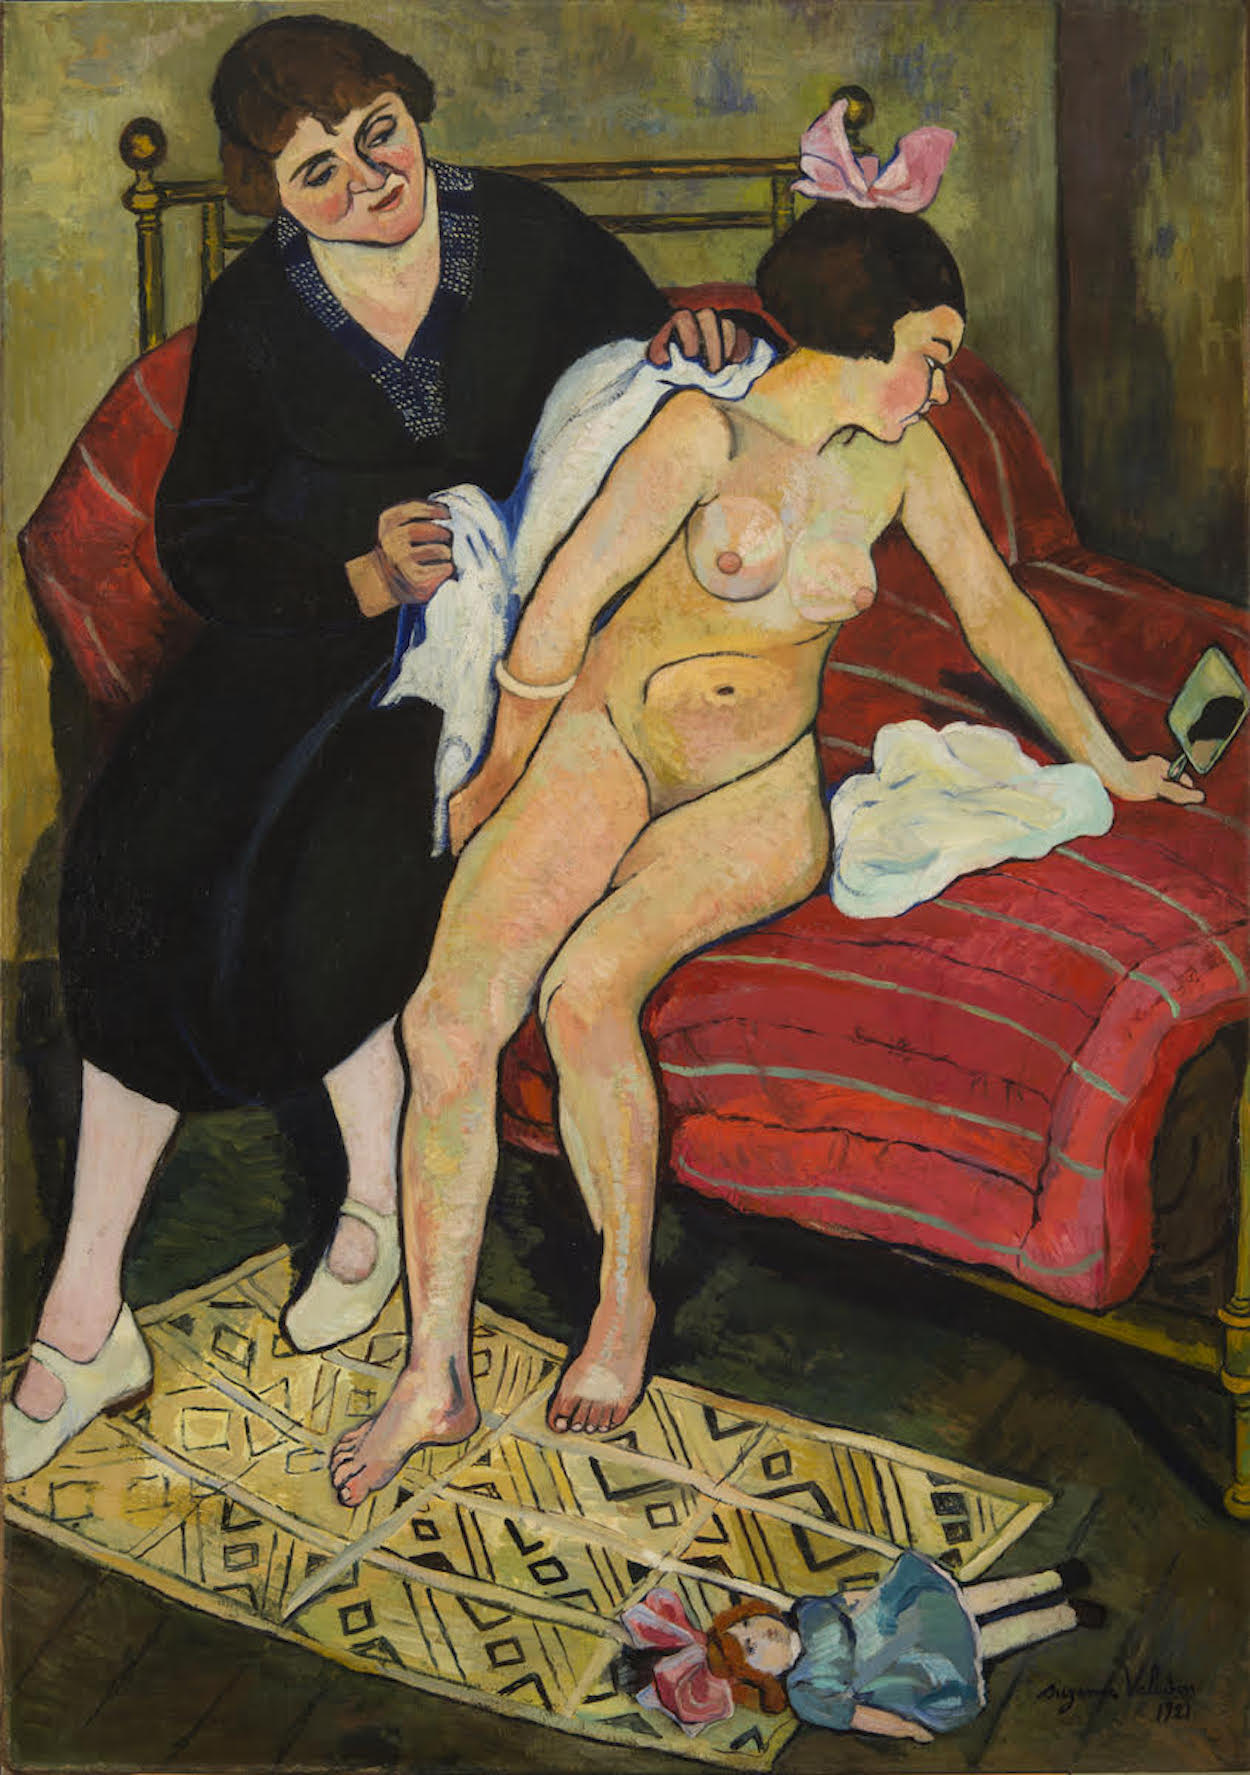 The Abandoned Doll by Suzanne Valadon - 1921 - 51 x 32 in National Museum of Women in the Arts